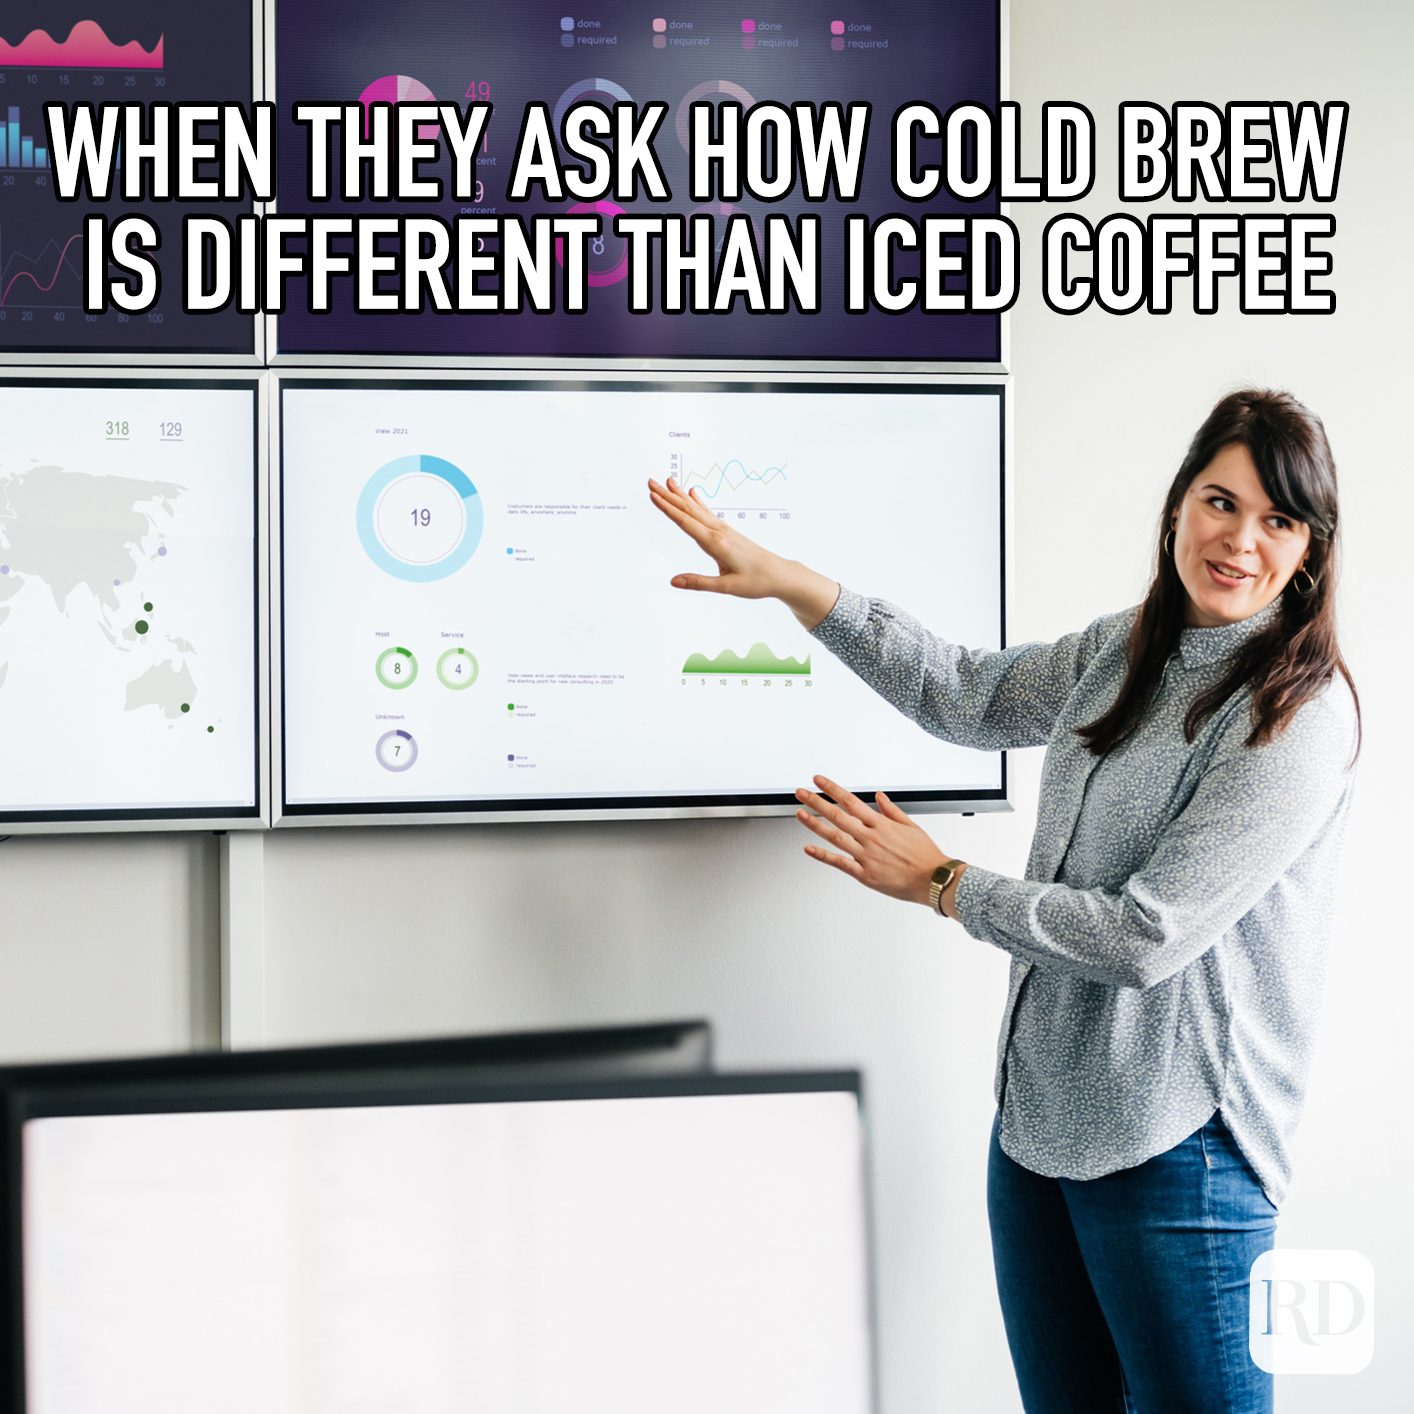 When They Ask How Cold Brew Is Different Than Iced Coffee meme text over image of woman giving presentation